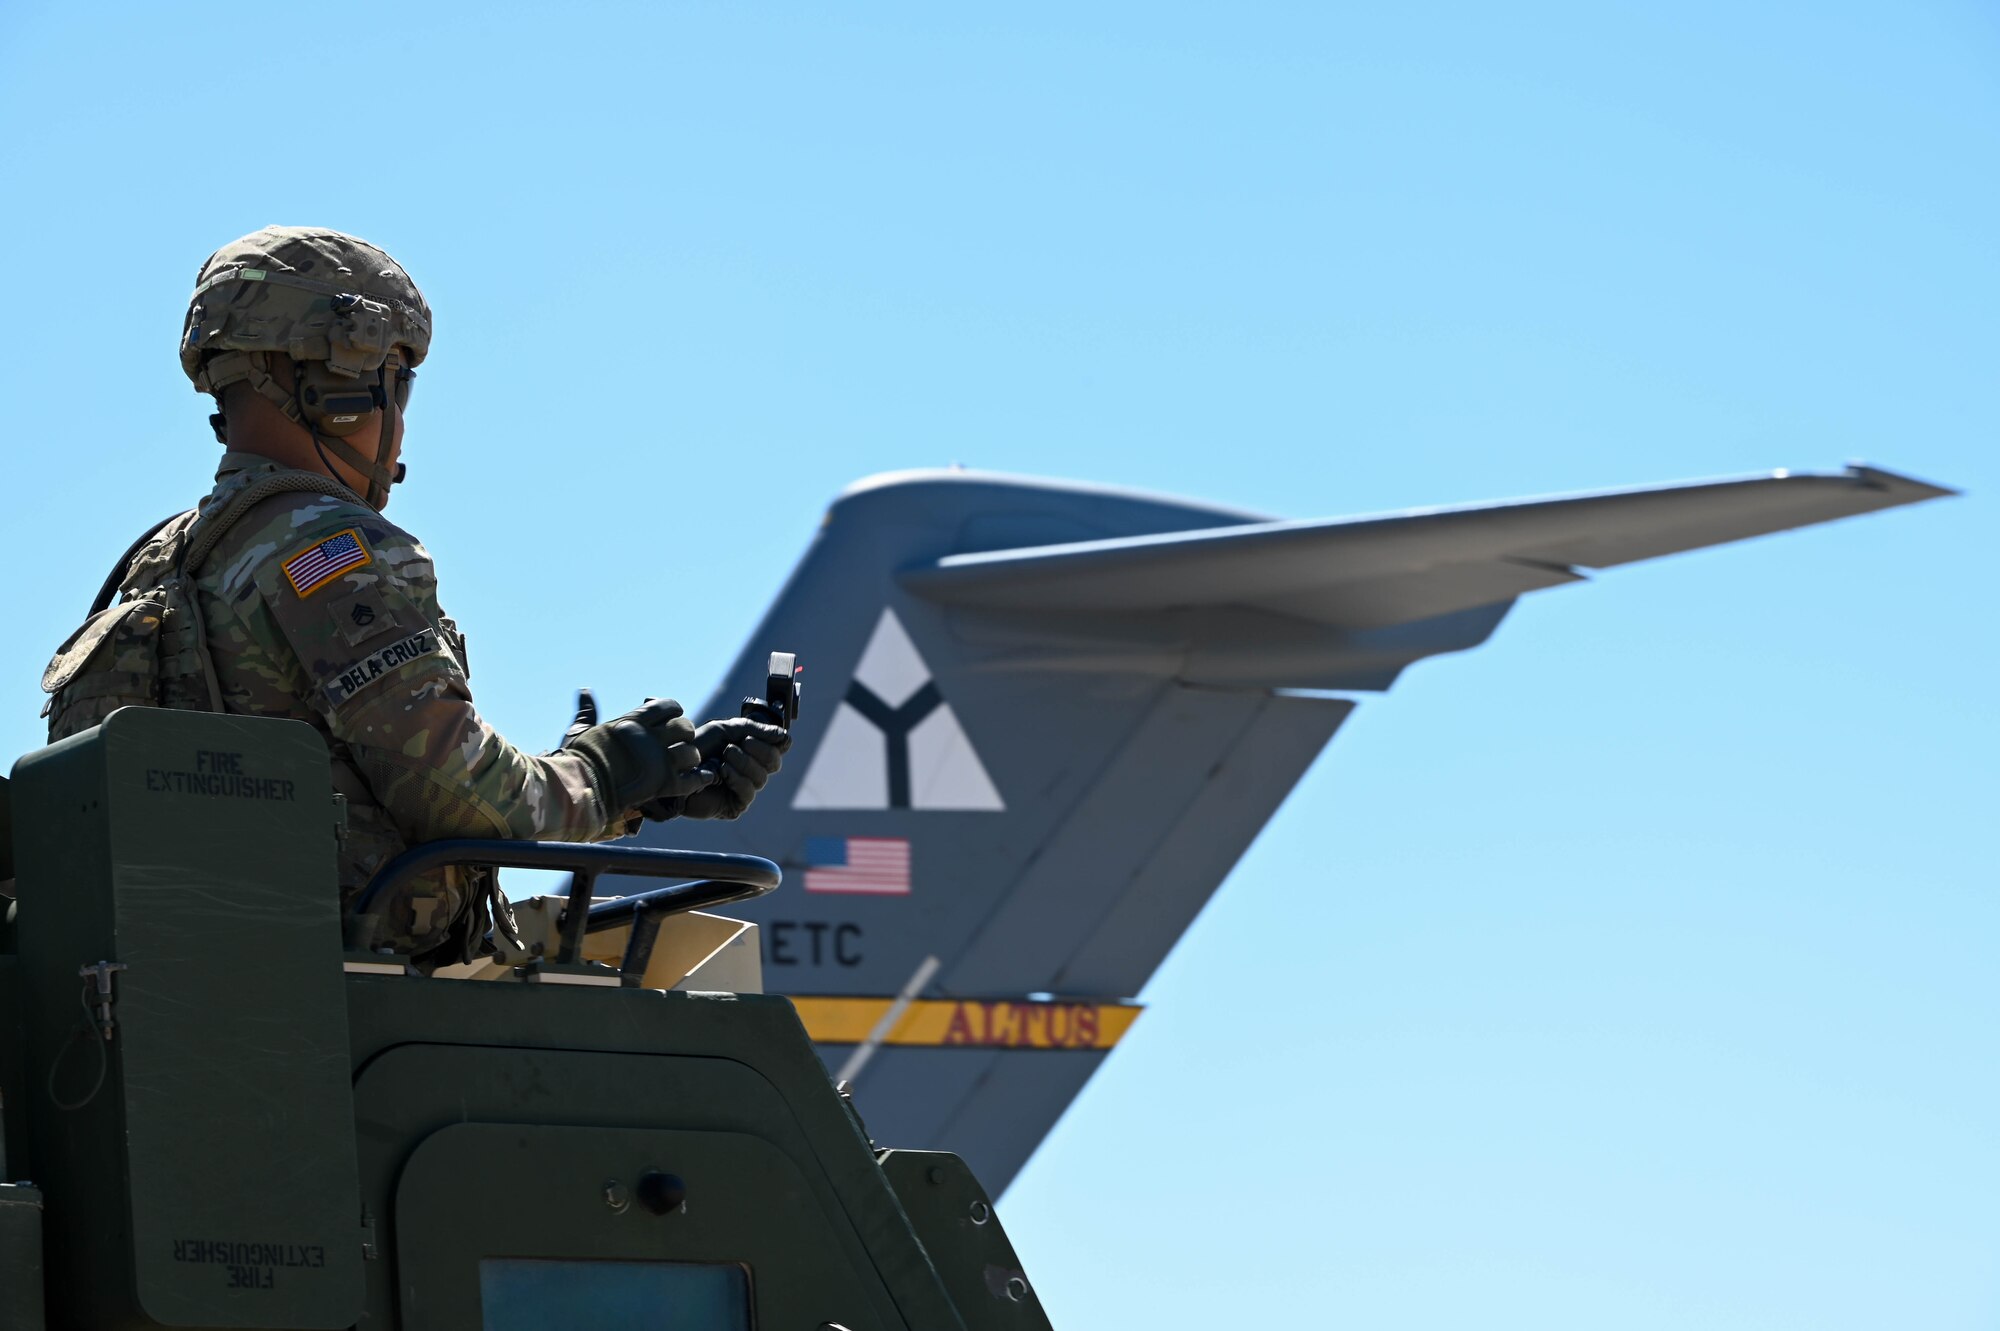 A soldier sits in an M142 High Mobility Artillery Rocket System (HIMARS) at Fort Sill, Oklahoma, May 26, 2022. The HIMARS carries three crew members: the gunner, driver, and launcher chief. (U.S. Air Force photo by Senior Airman Kayla Christenson)